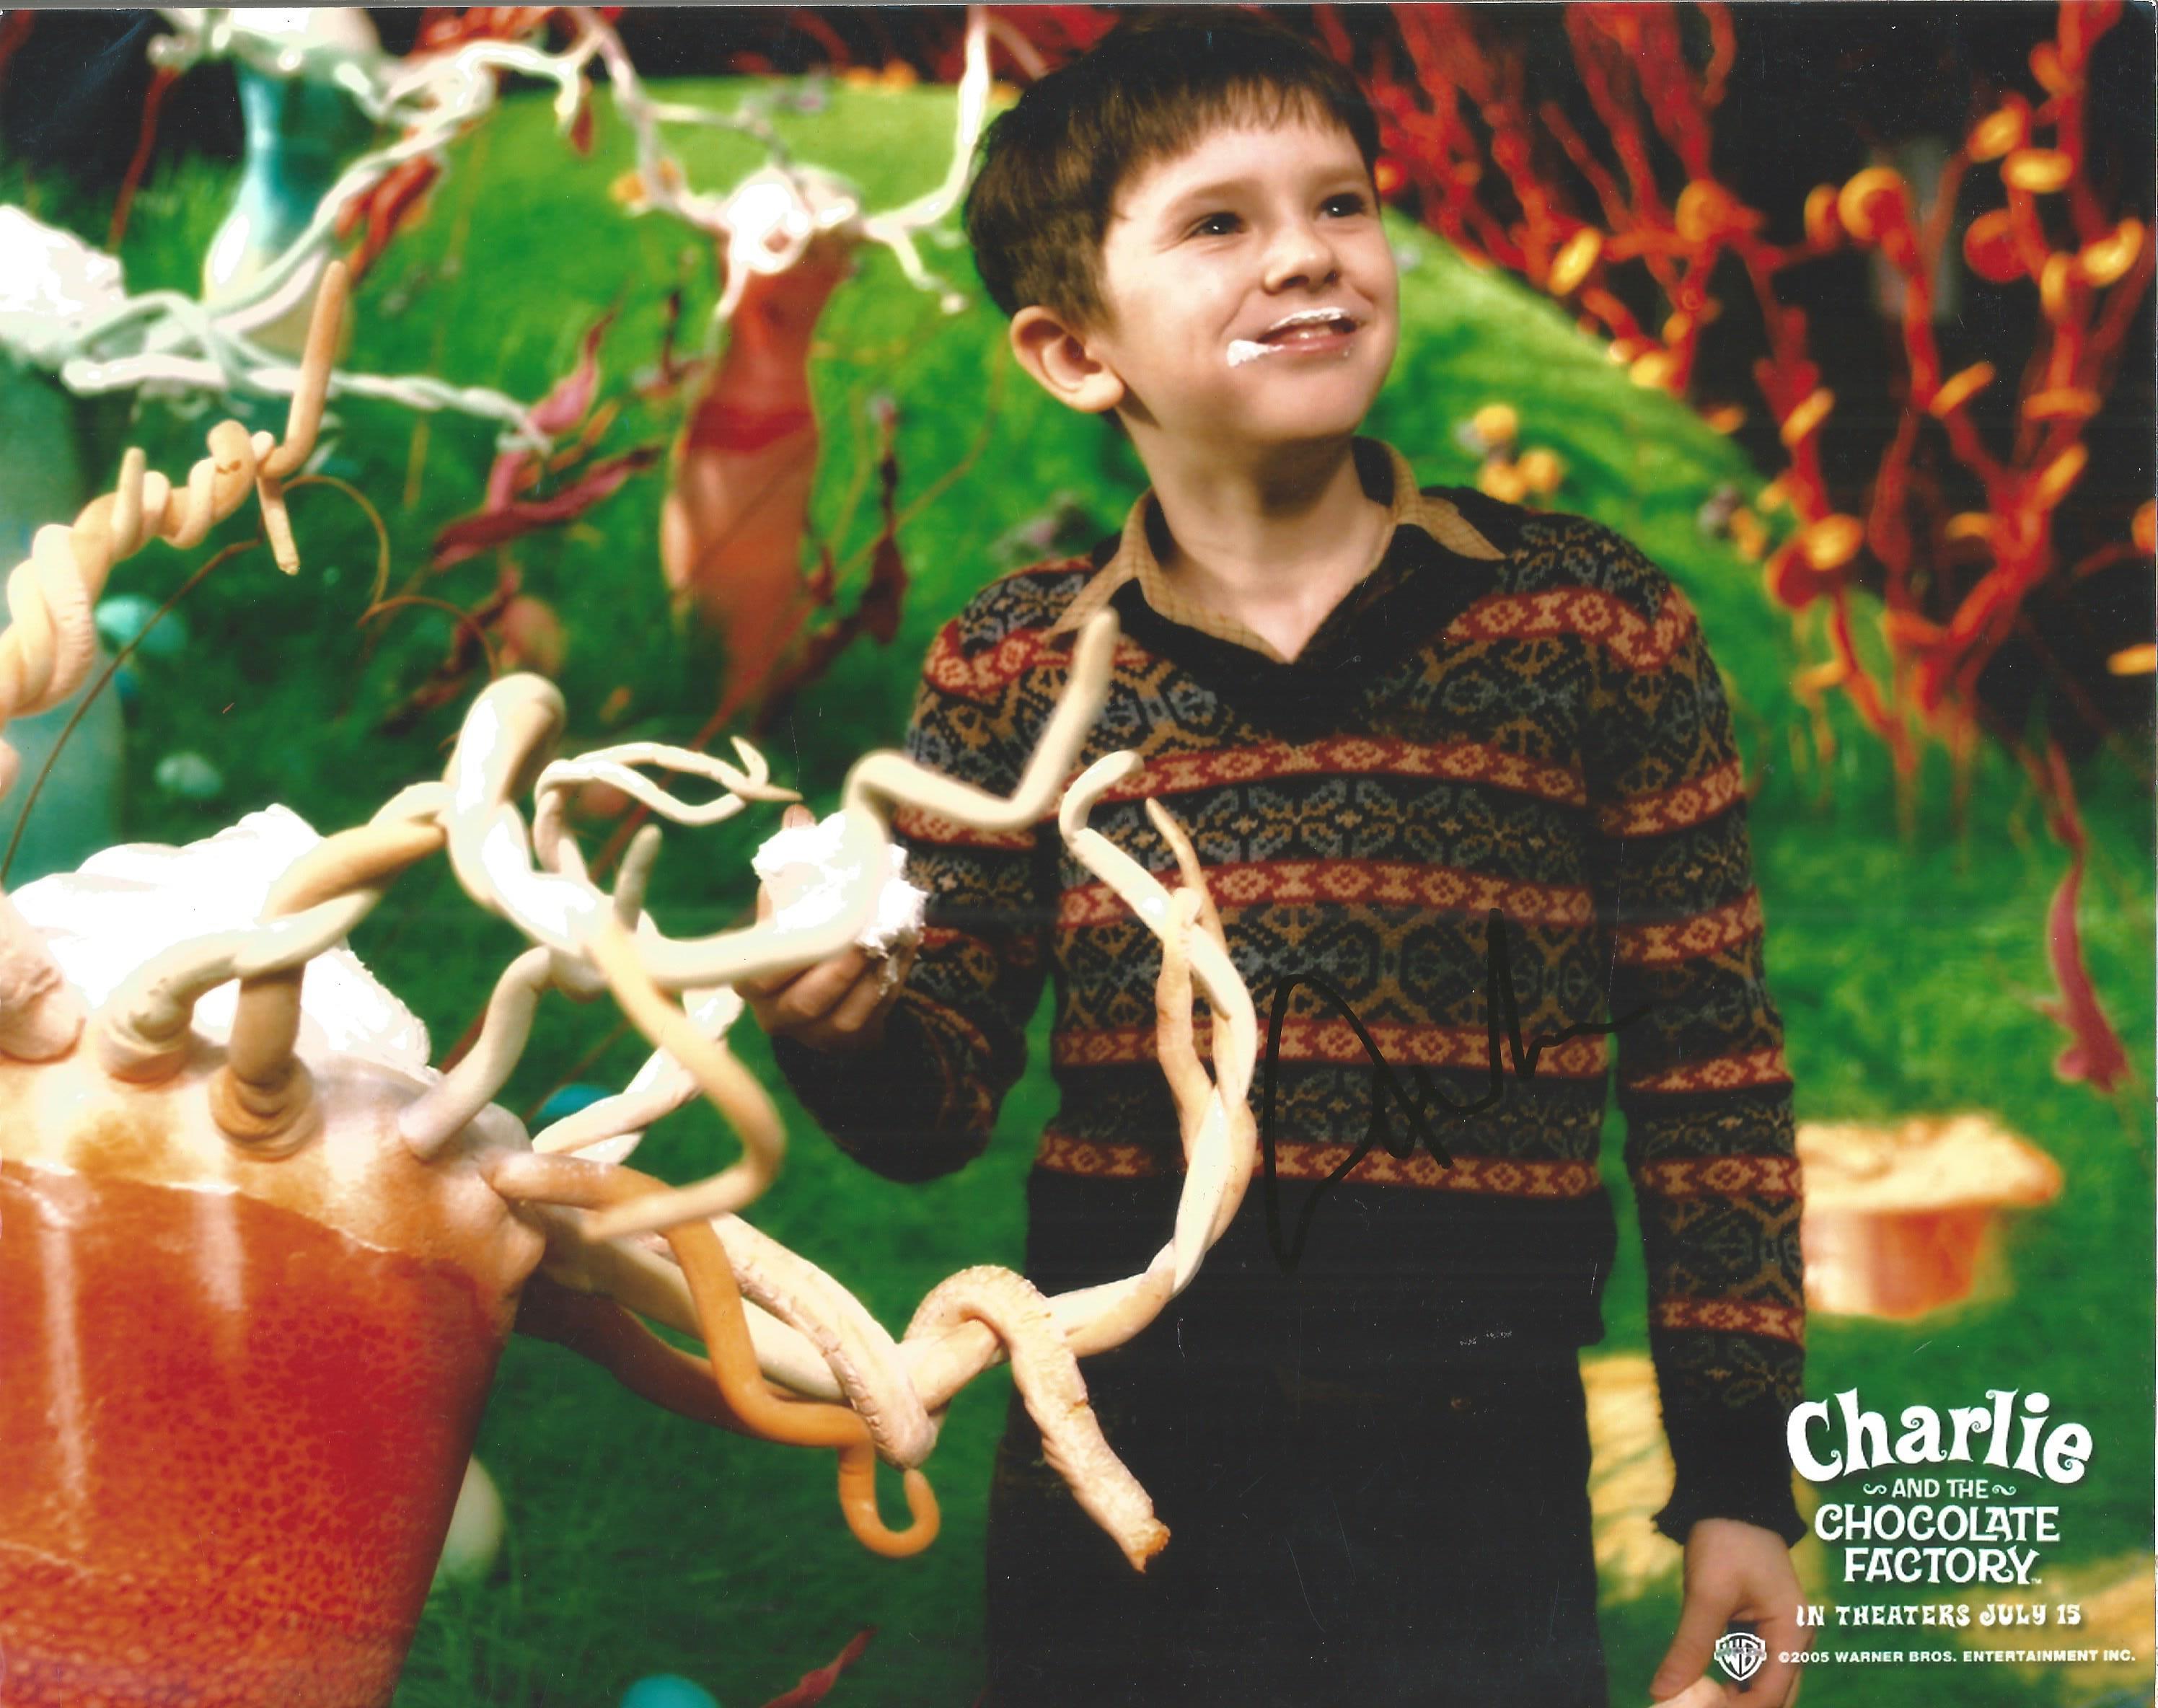 Freddie Highmore Charlie and The Chocolate Factory promo actor signed colour photo 10 x 8 inch.